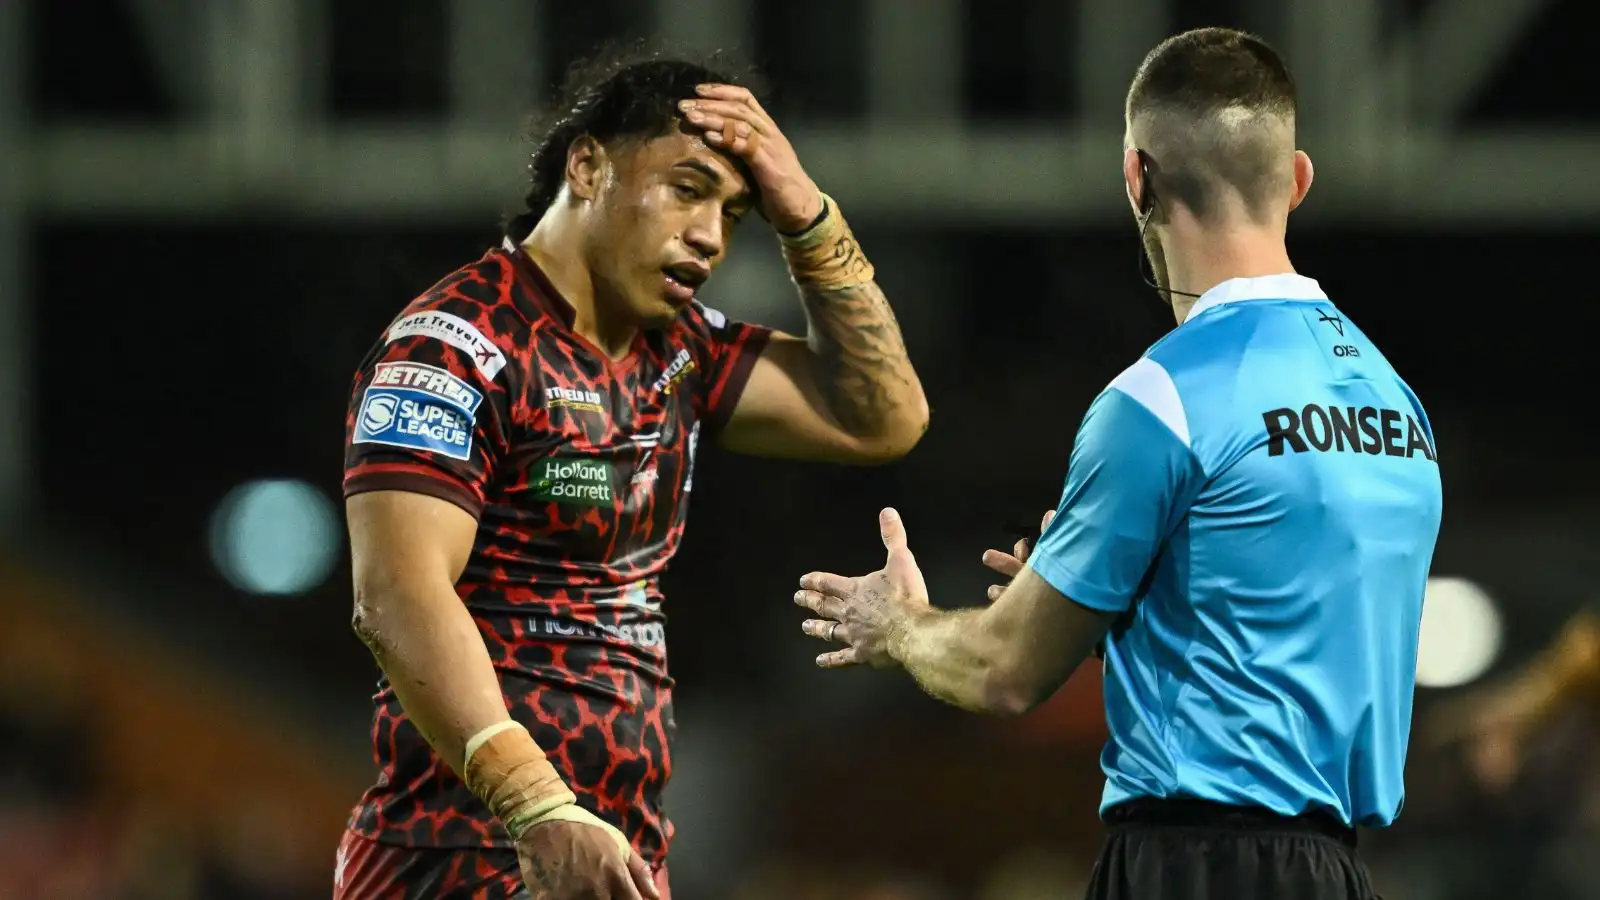 Three Super League clubs to appeal suspensions on Tuesday evening